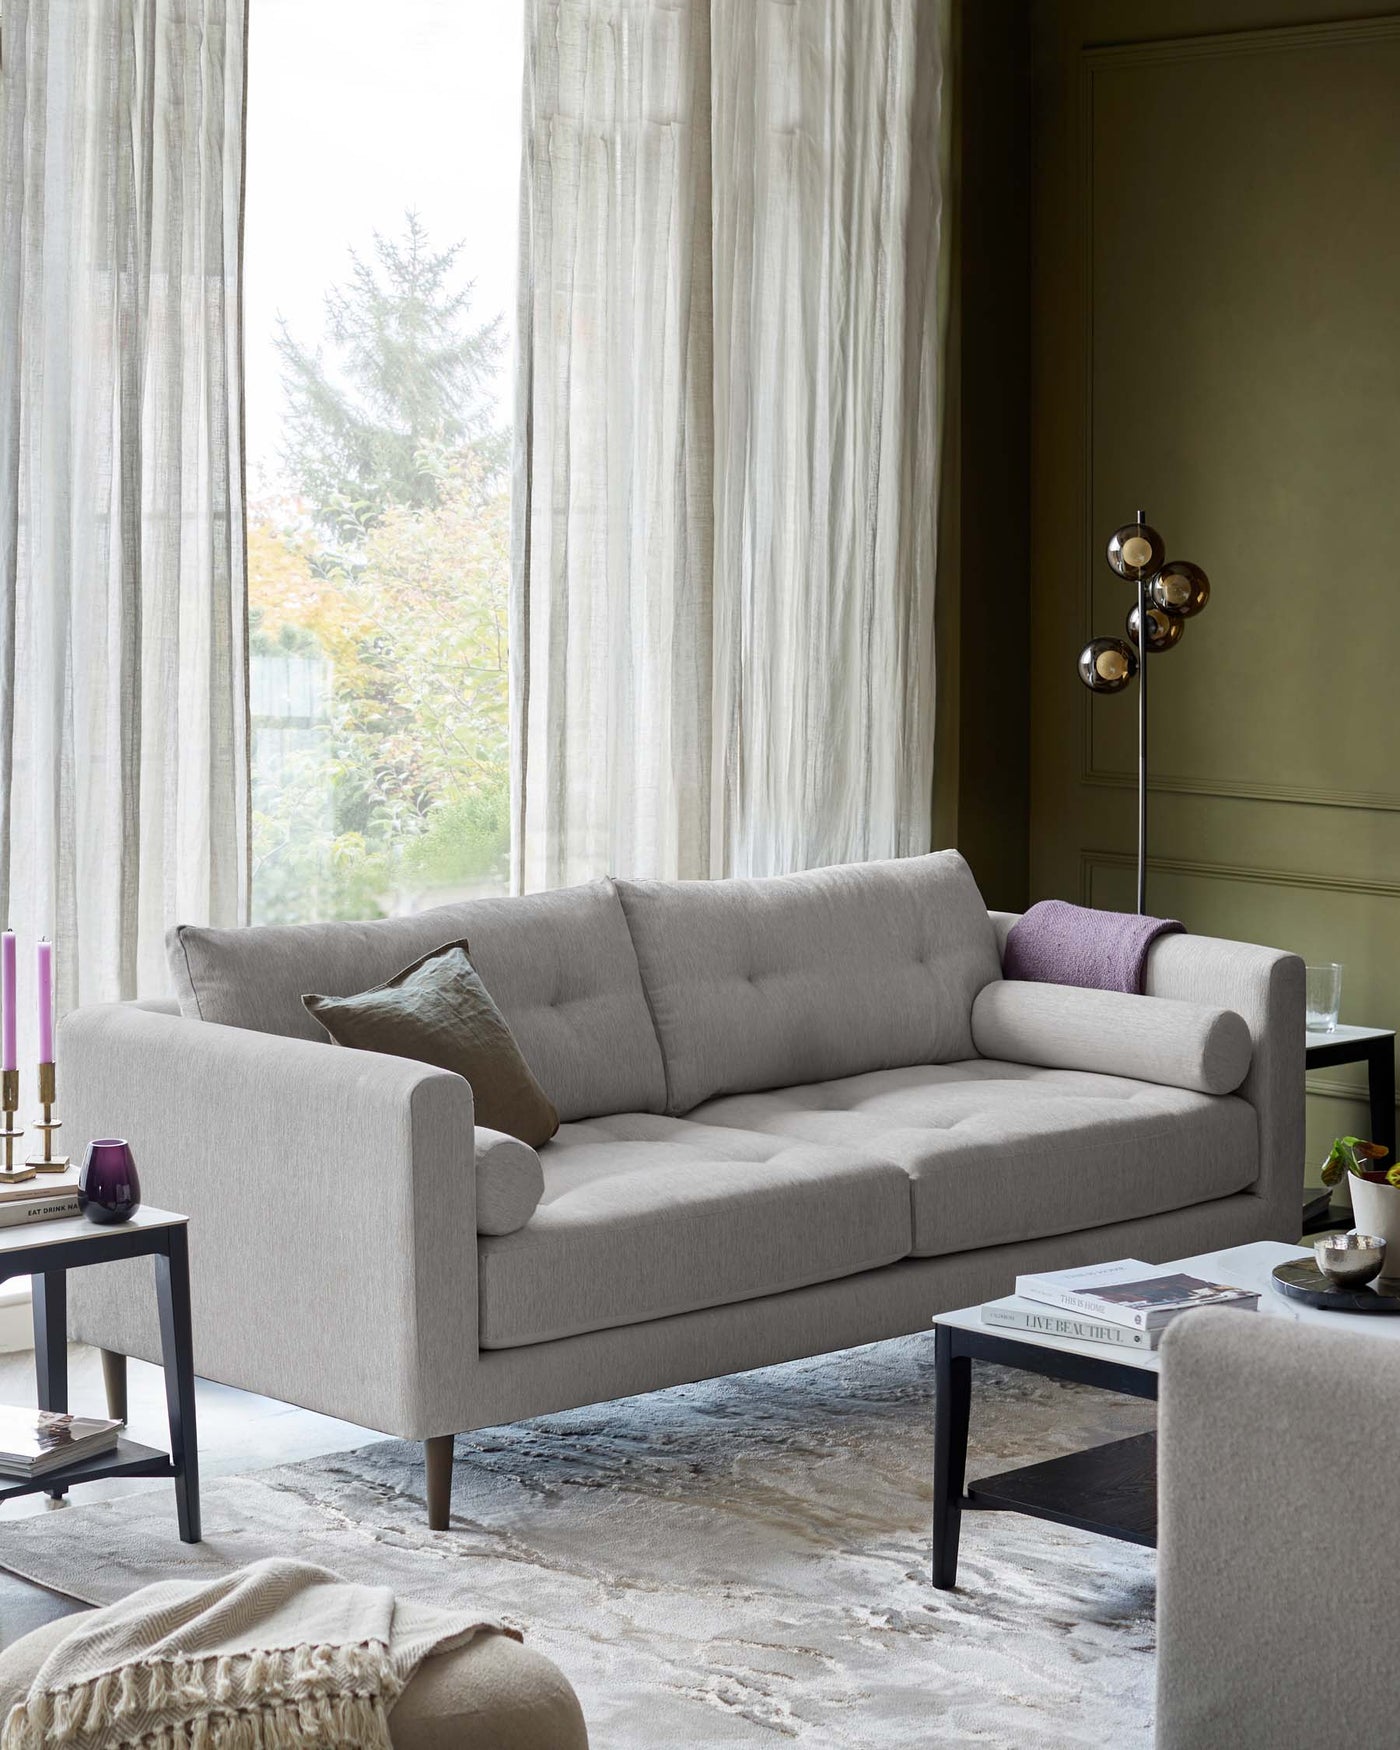 Elegant modern three-seater sofa with plush light grey upholstery and minimalist armrests, complemented by a dark, square-framed side table with a black surface, placed on a textured grey area rug.